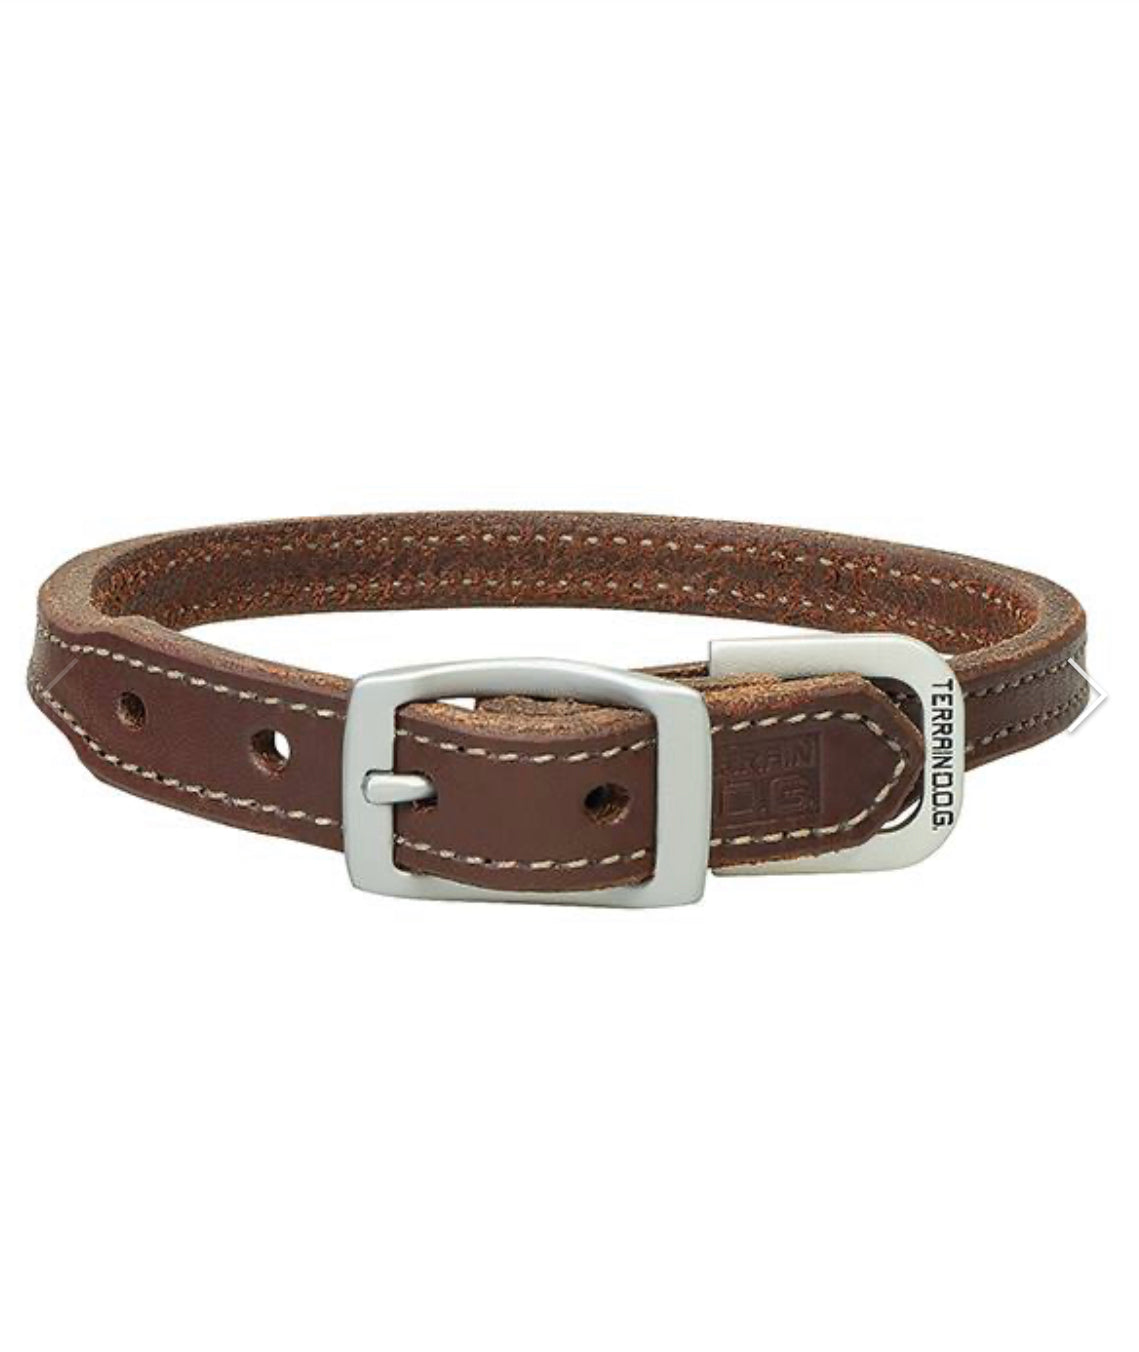 Oiled Harness Leather Hybrid Dog Collar -Brown